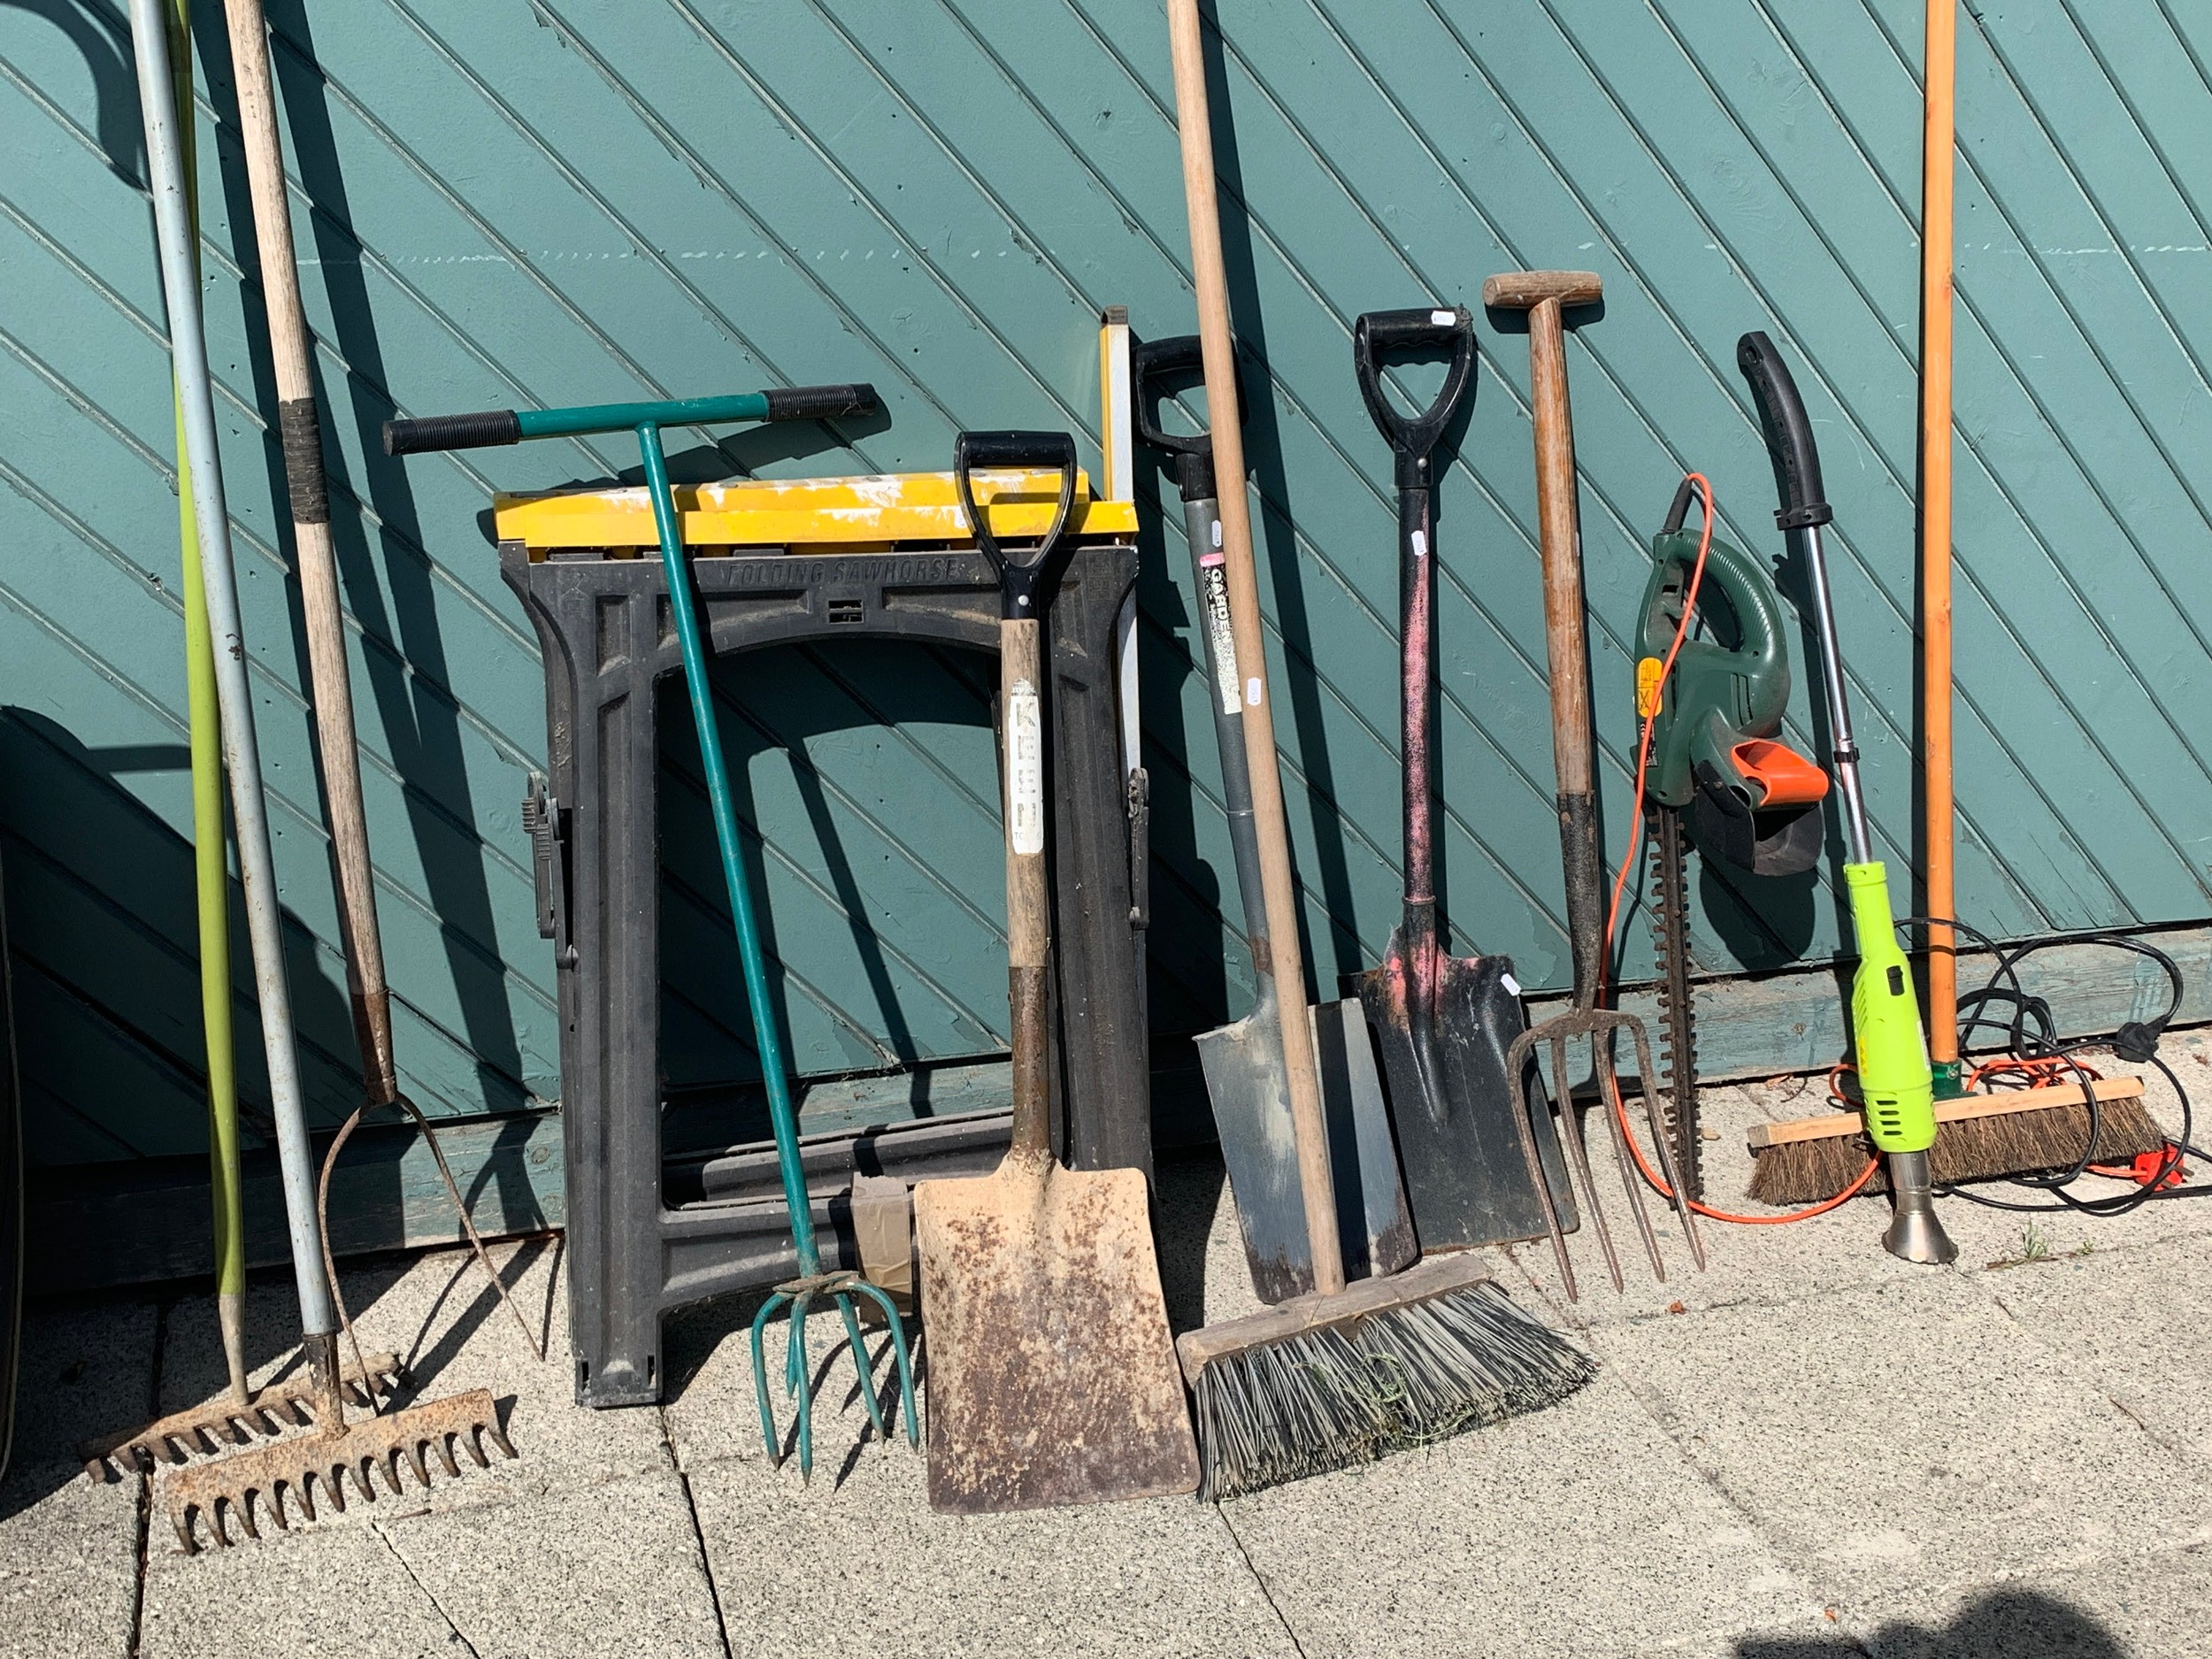 A collection of garden tools, including a Flymo Vision Compact 380, rakes, brooms, forks, spades, - Image 3 of 3